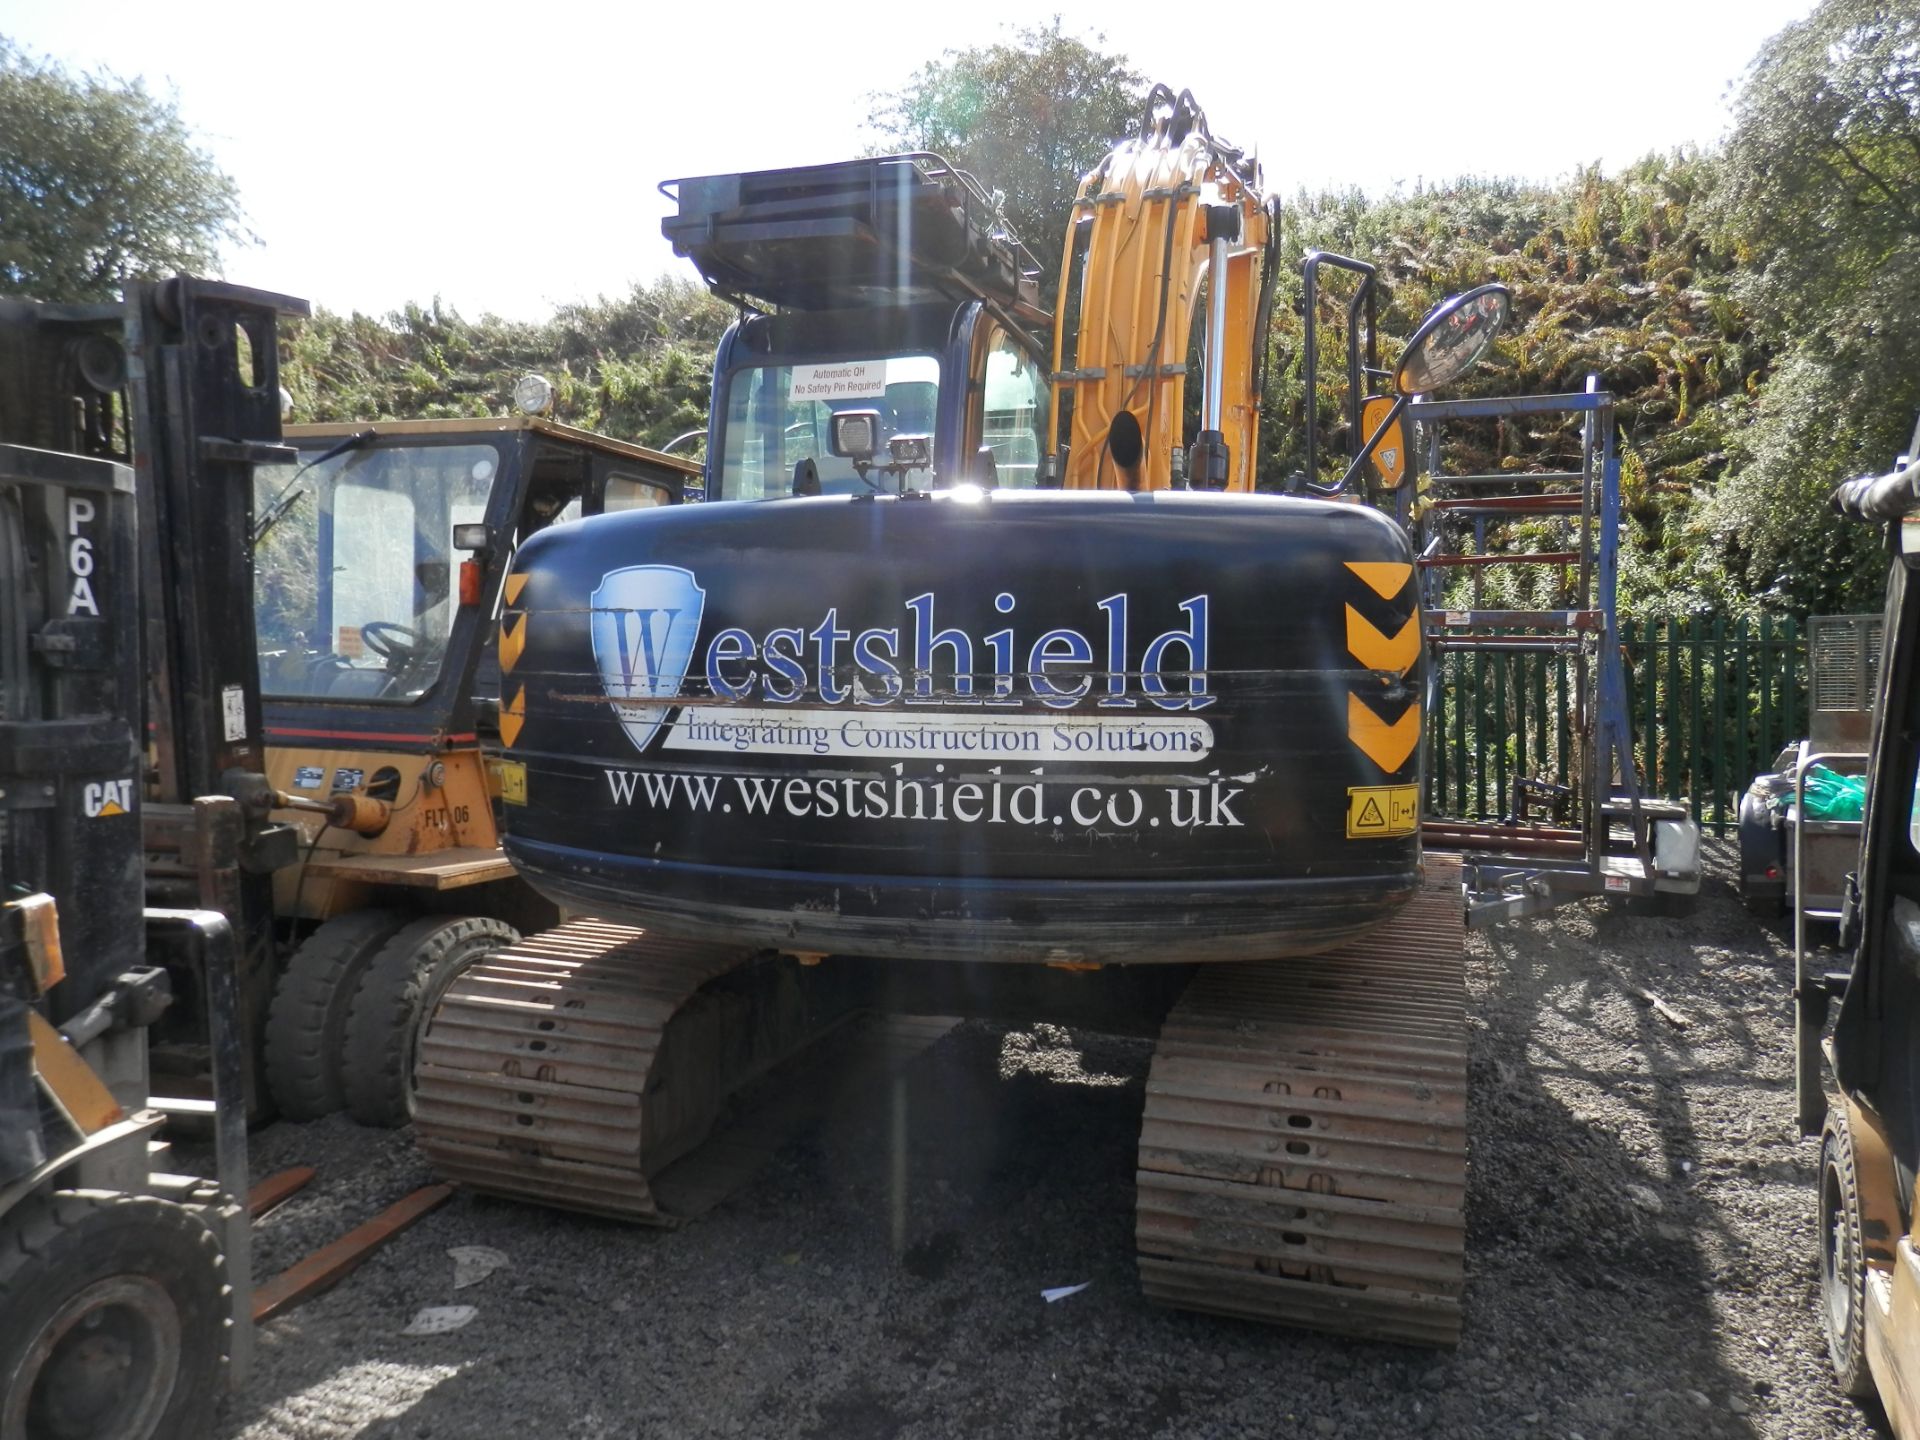 2010 JCBJS130 13.4 TONNE TRACKED DIGGER, ALL WORKING READY FOR WORK. 7806 WORKING HOURS. - Image 12 of 12